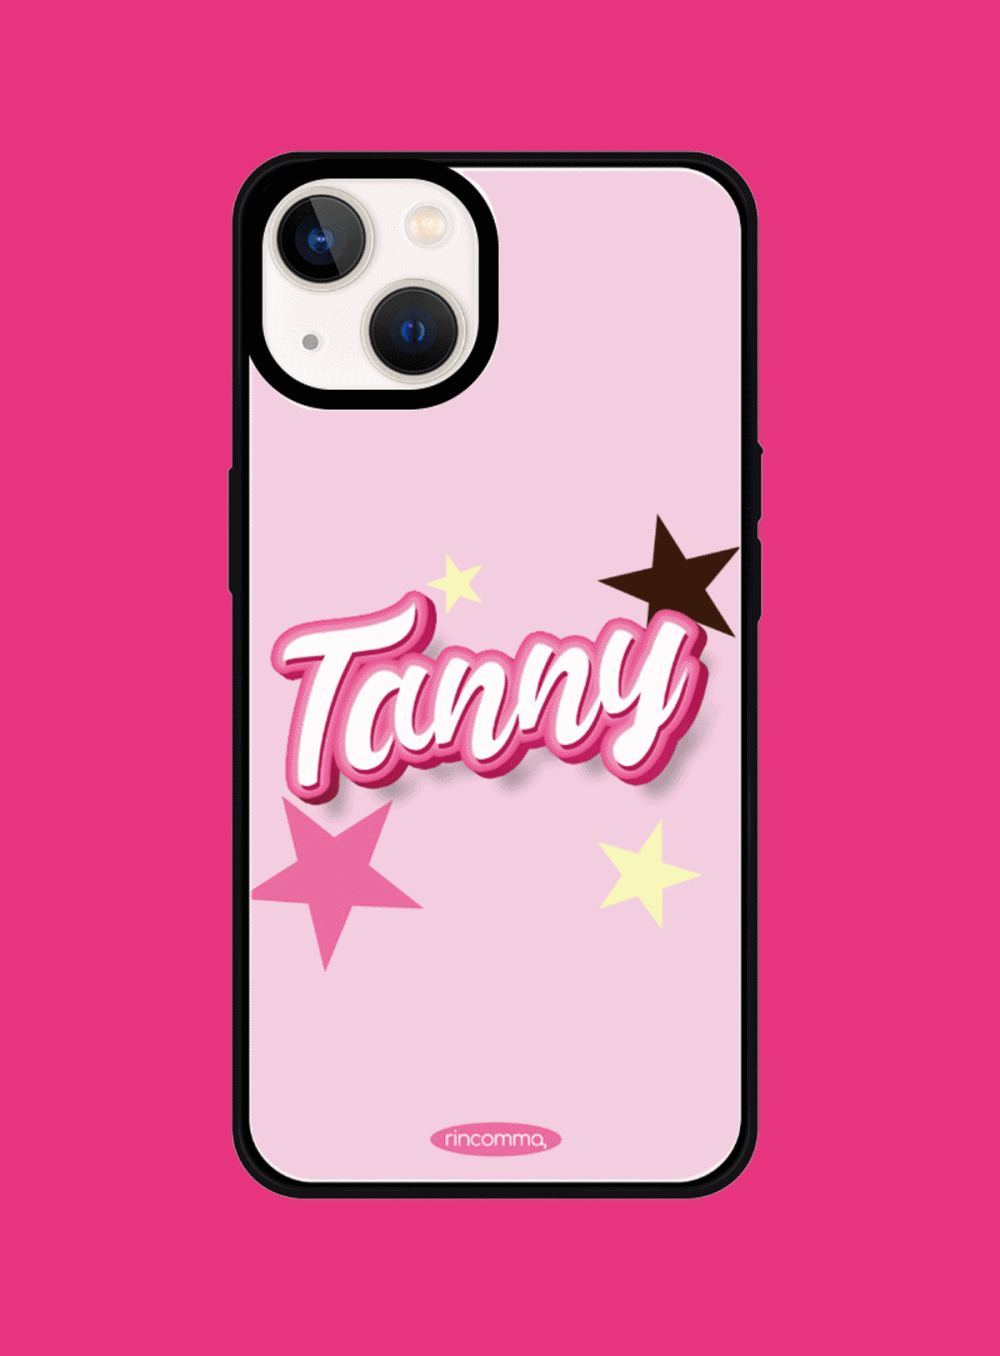 Tanny Pinky phone case